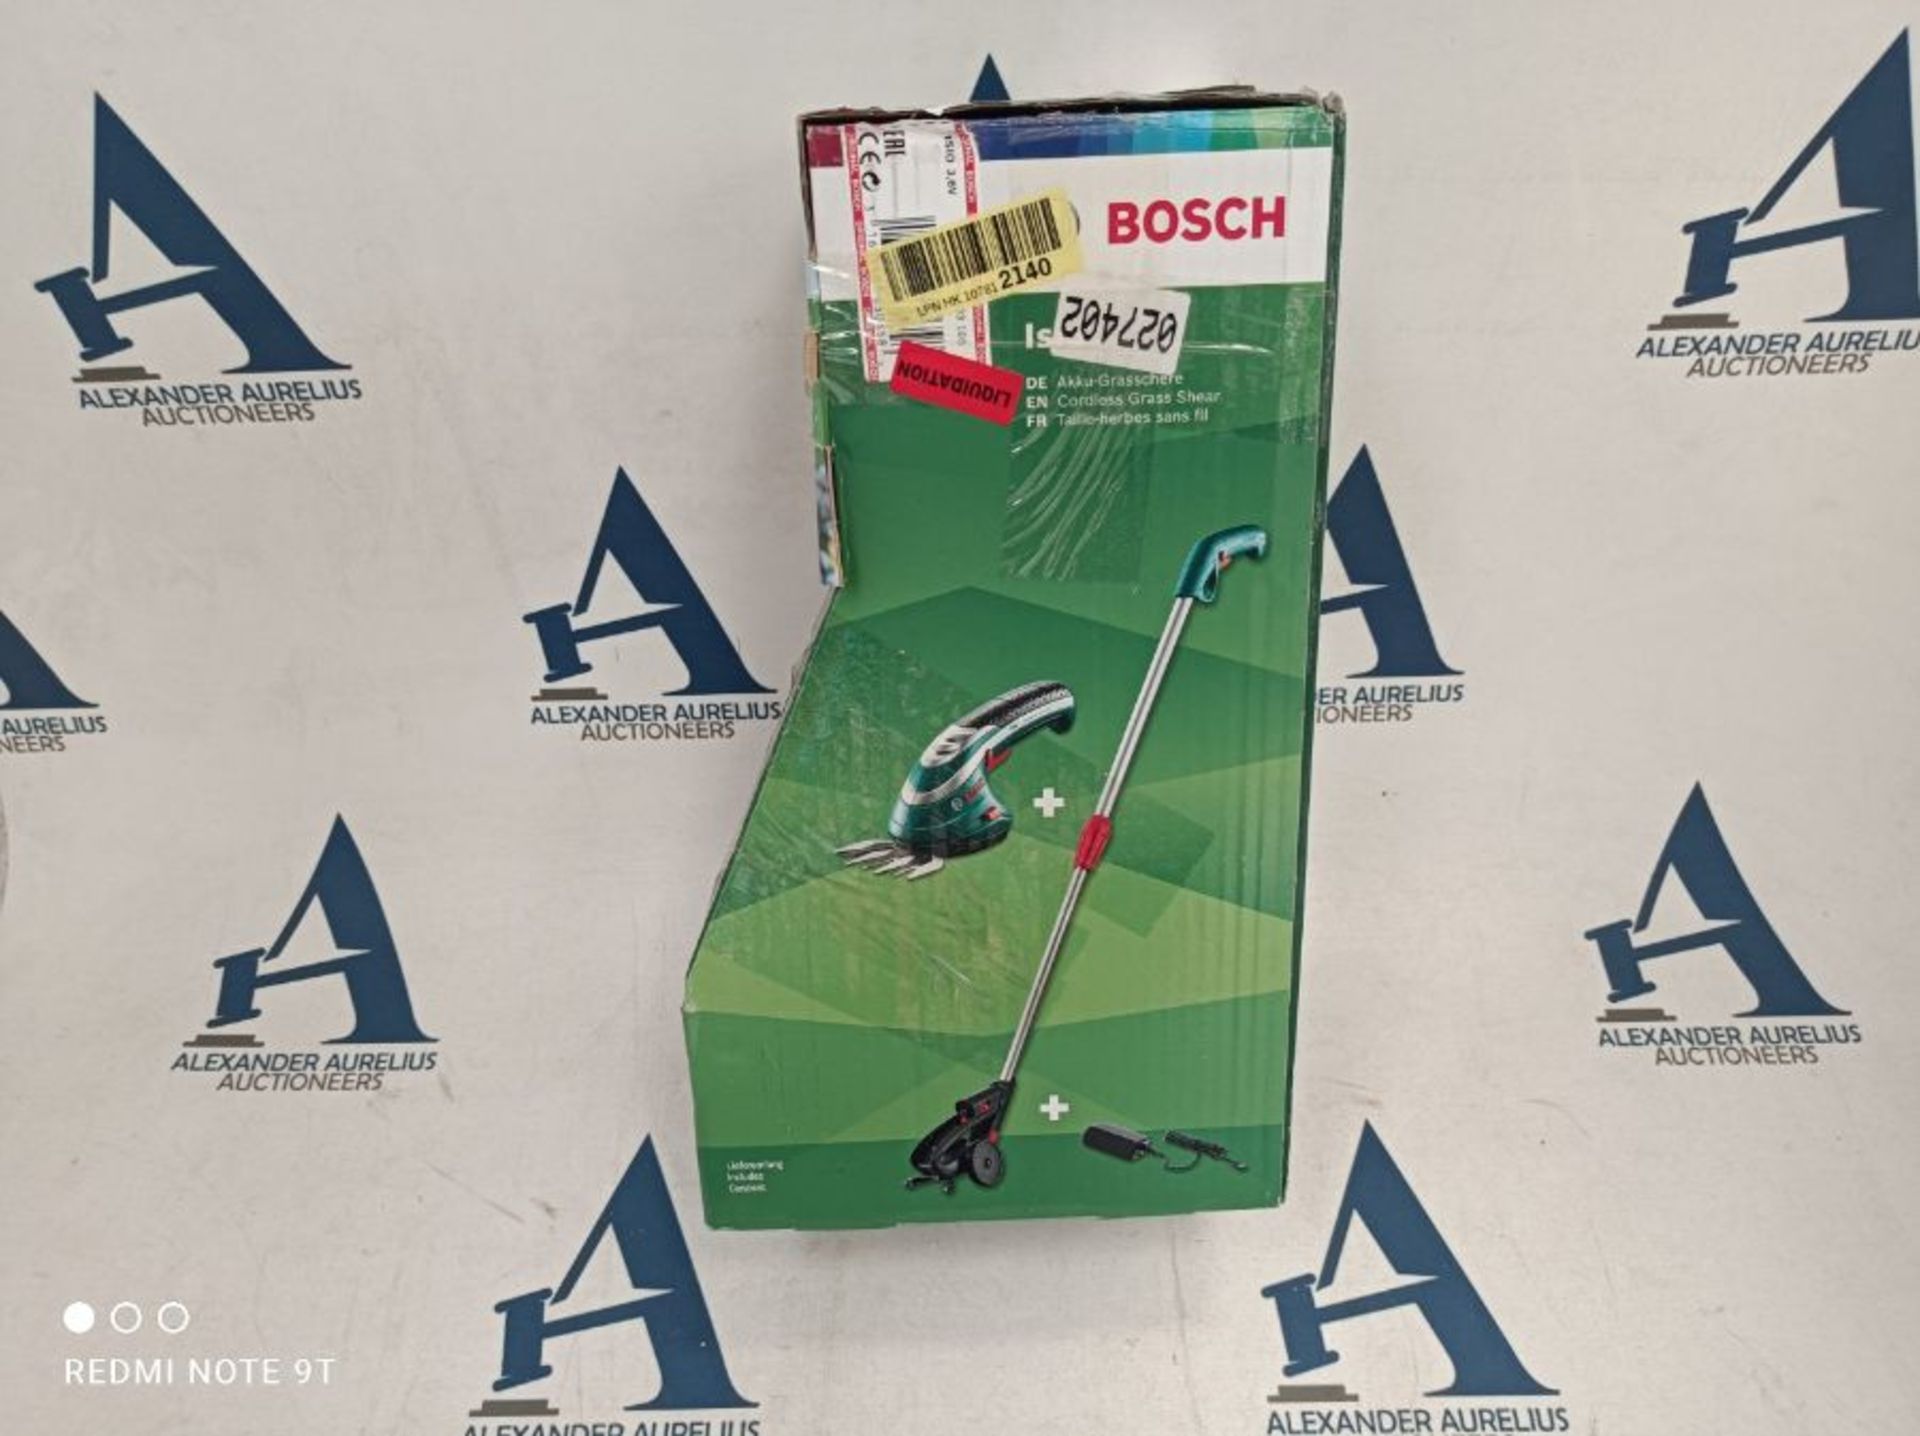 RRP £105.00 Bosch ISIO Battery hedge trimmer 1200g ISIO, Battery hedge trimmer, 8 cm, Black, Green - Image 3 of 3